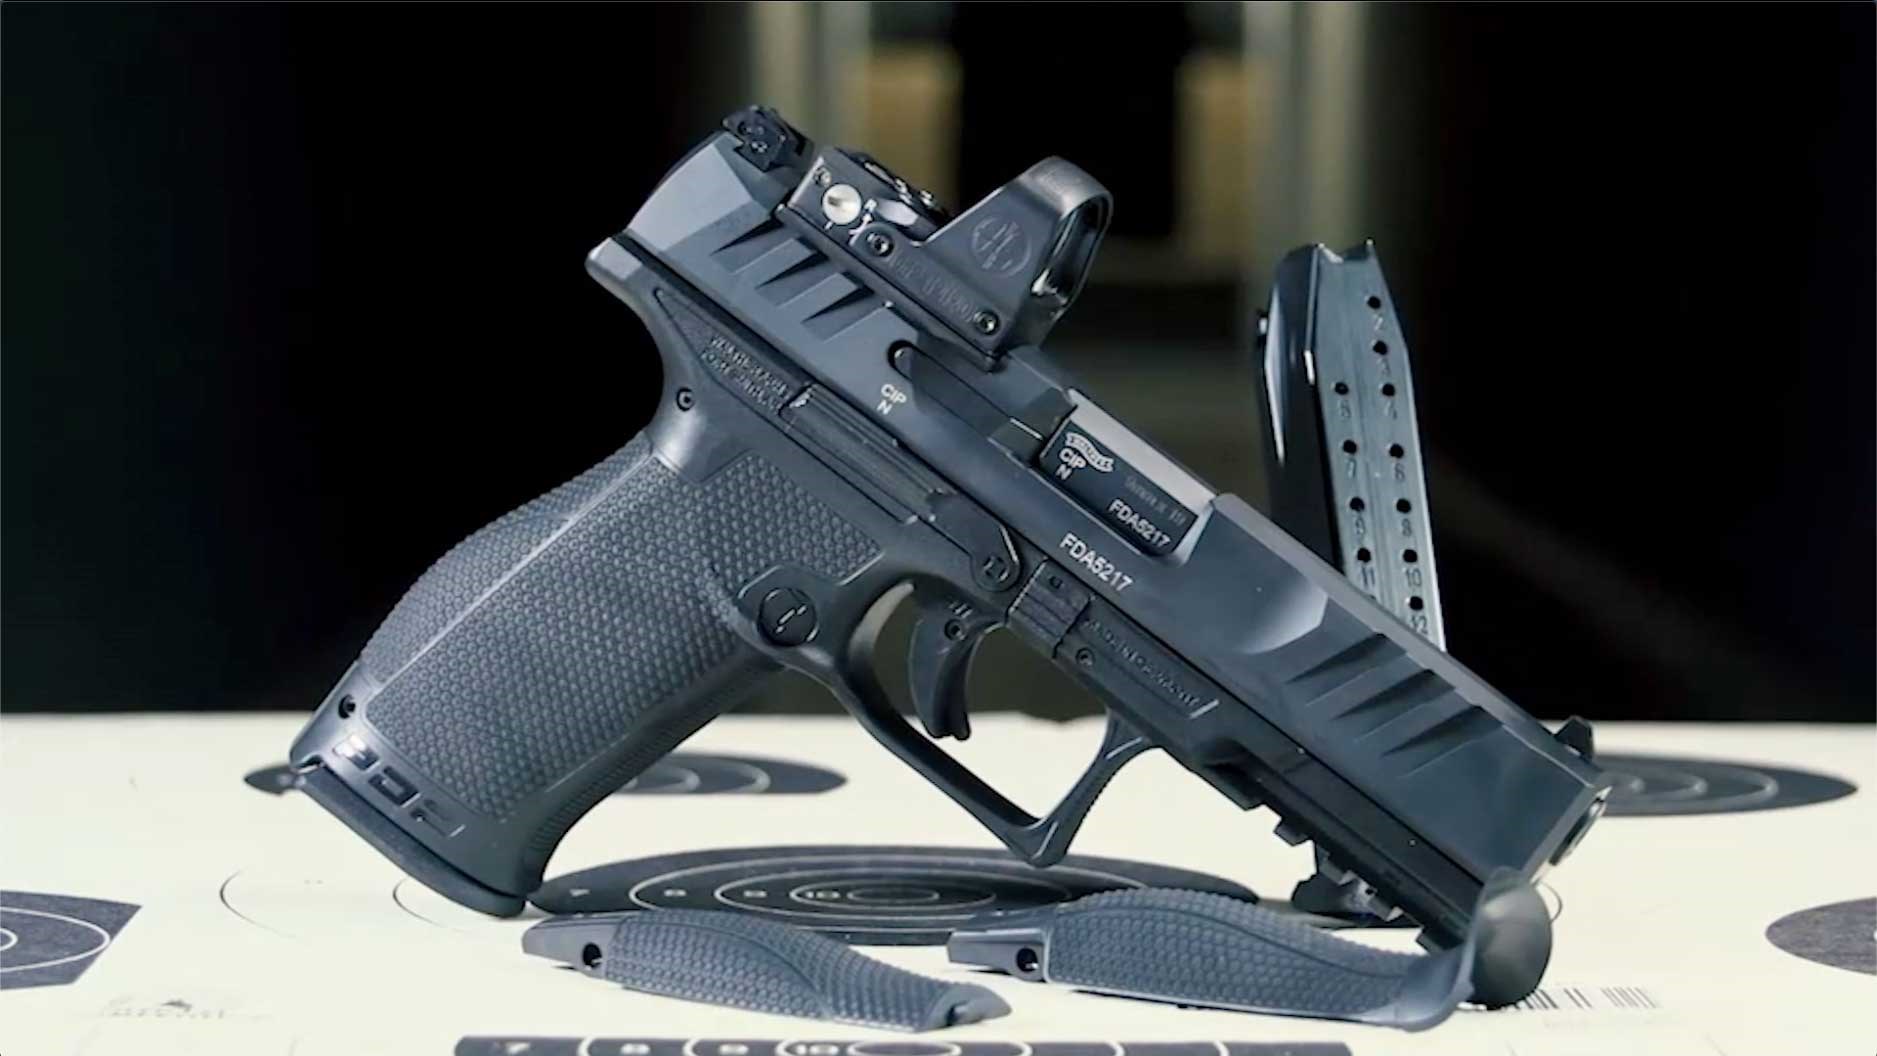 The right side of a red-dot-equipped Walther Performance Duty pistol shown next to bullseye targets and interchangeable backstraps.